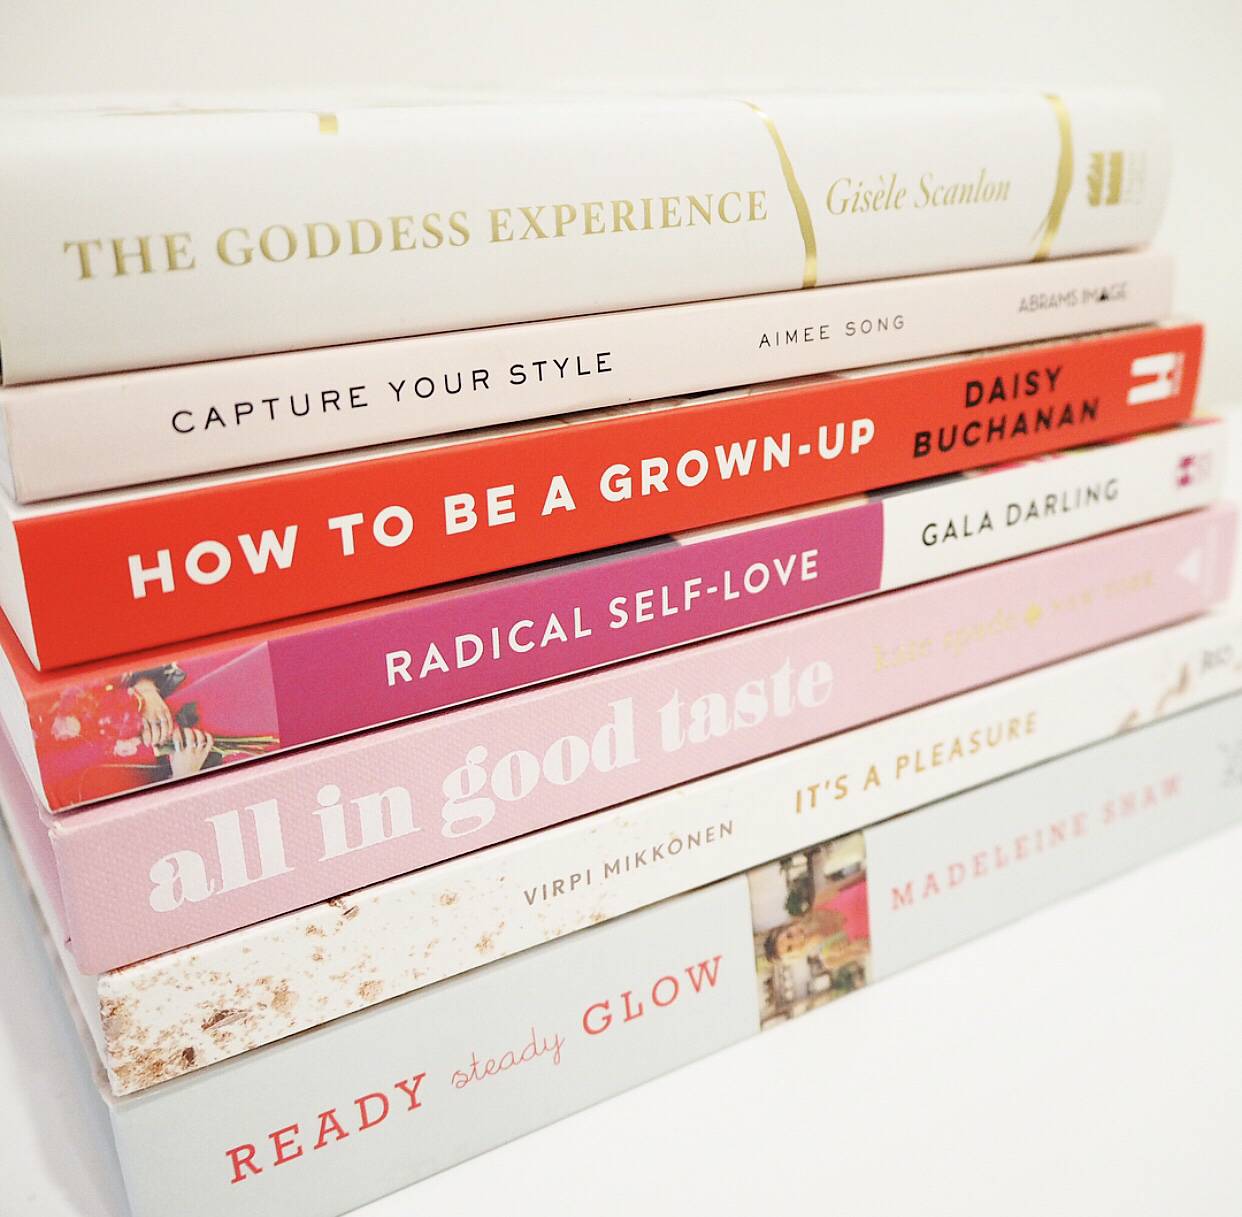 Ready Steady Glow by Madeline Shaw, It's a Pleasure by Virpi Mikkonen, All in Good Taste by Kate Spade, Radical Self Love by Gala Darling, How to be a Grown Up By Daisy Buchanan, Capture Your Style by Aimee Song, The Goddess Experience by Gisele Scanlon